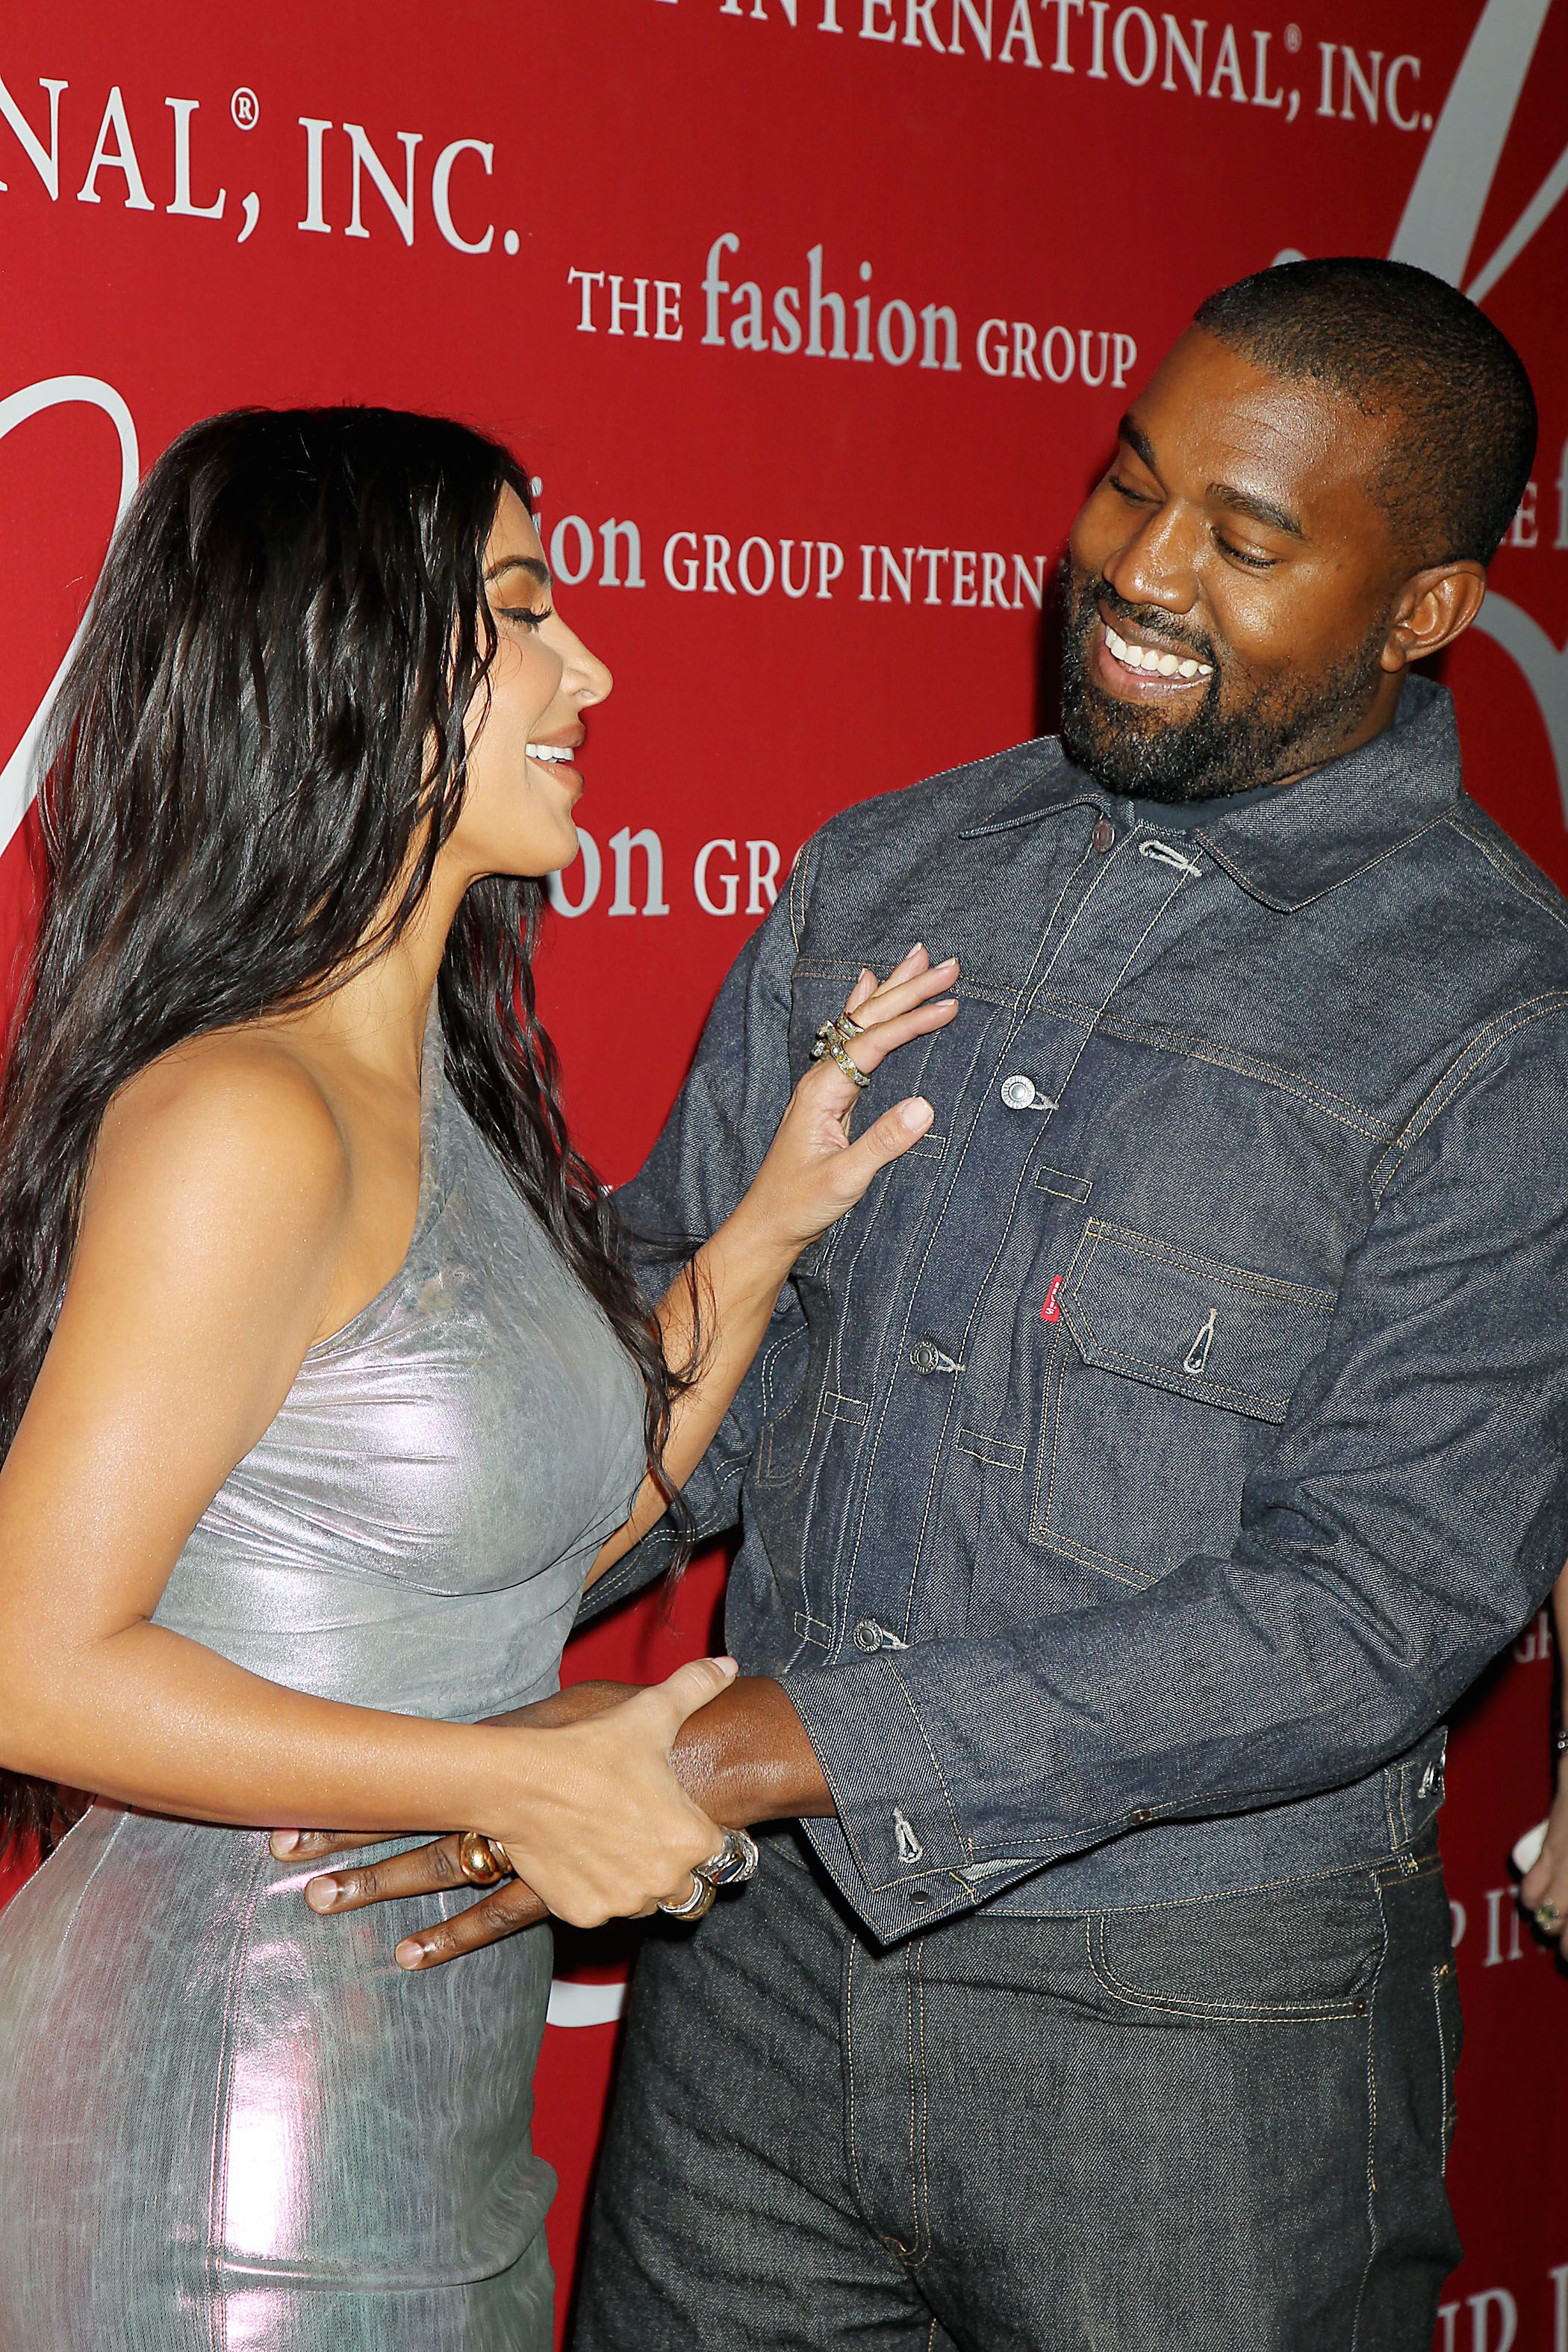 How Will Kim Kardashian's Style Evolve without Kanye West's Intervention?